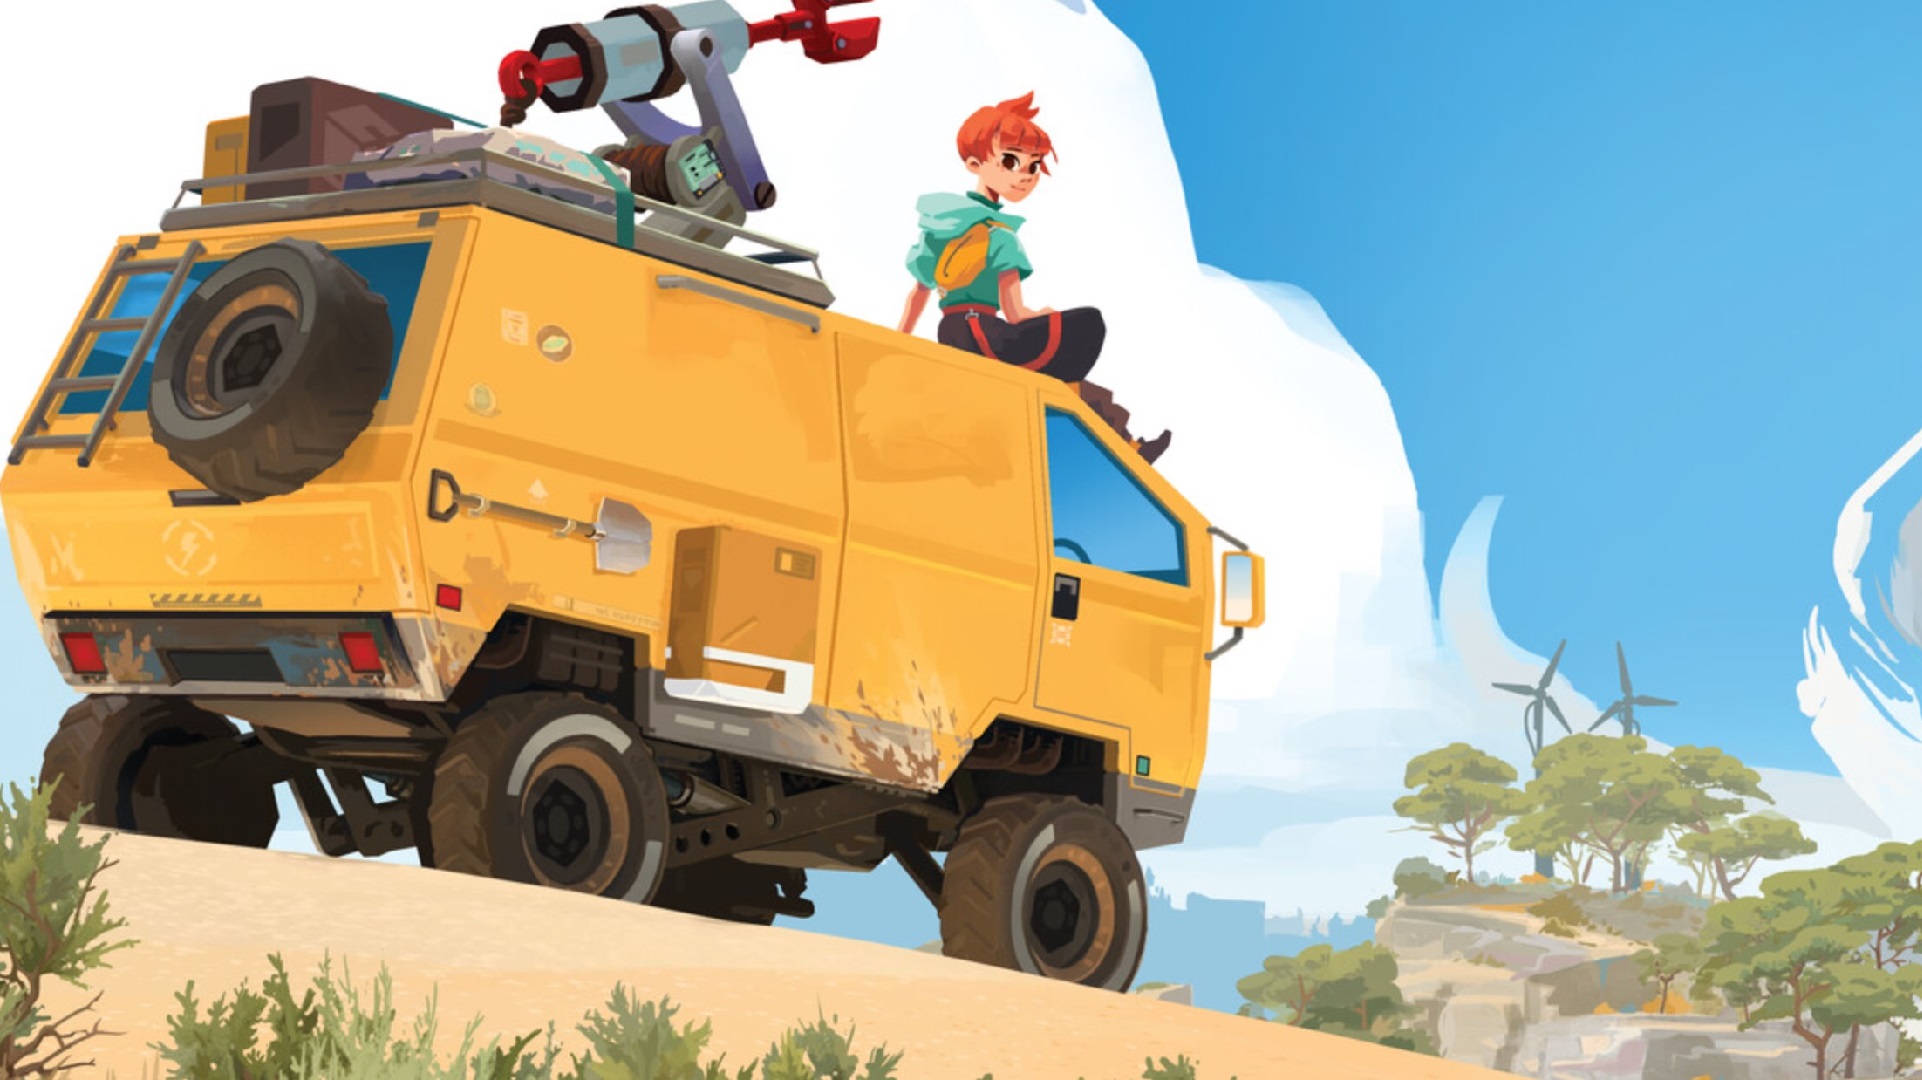  One of my favorite games from this year's summer showcases, a peaceful adventure where you explore a desert planet in a beat up van, has a demo available right now 